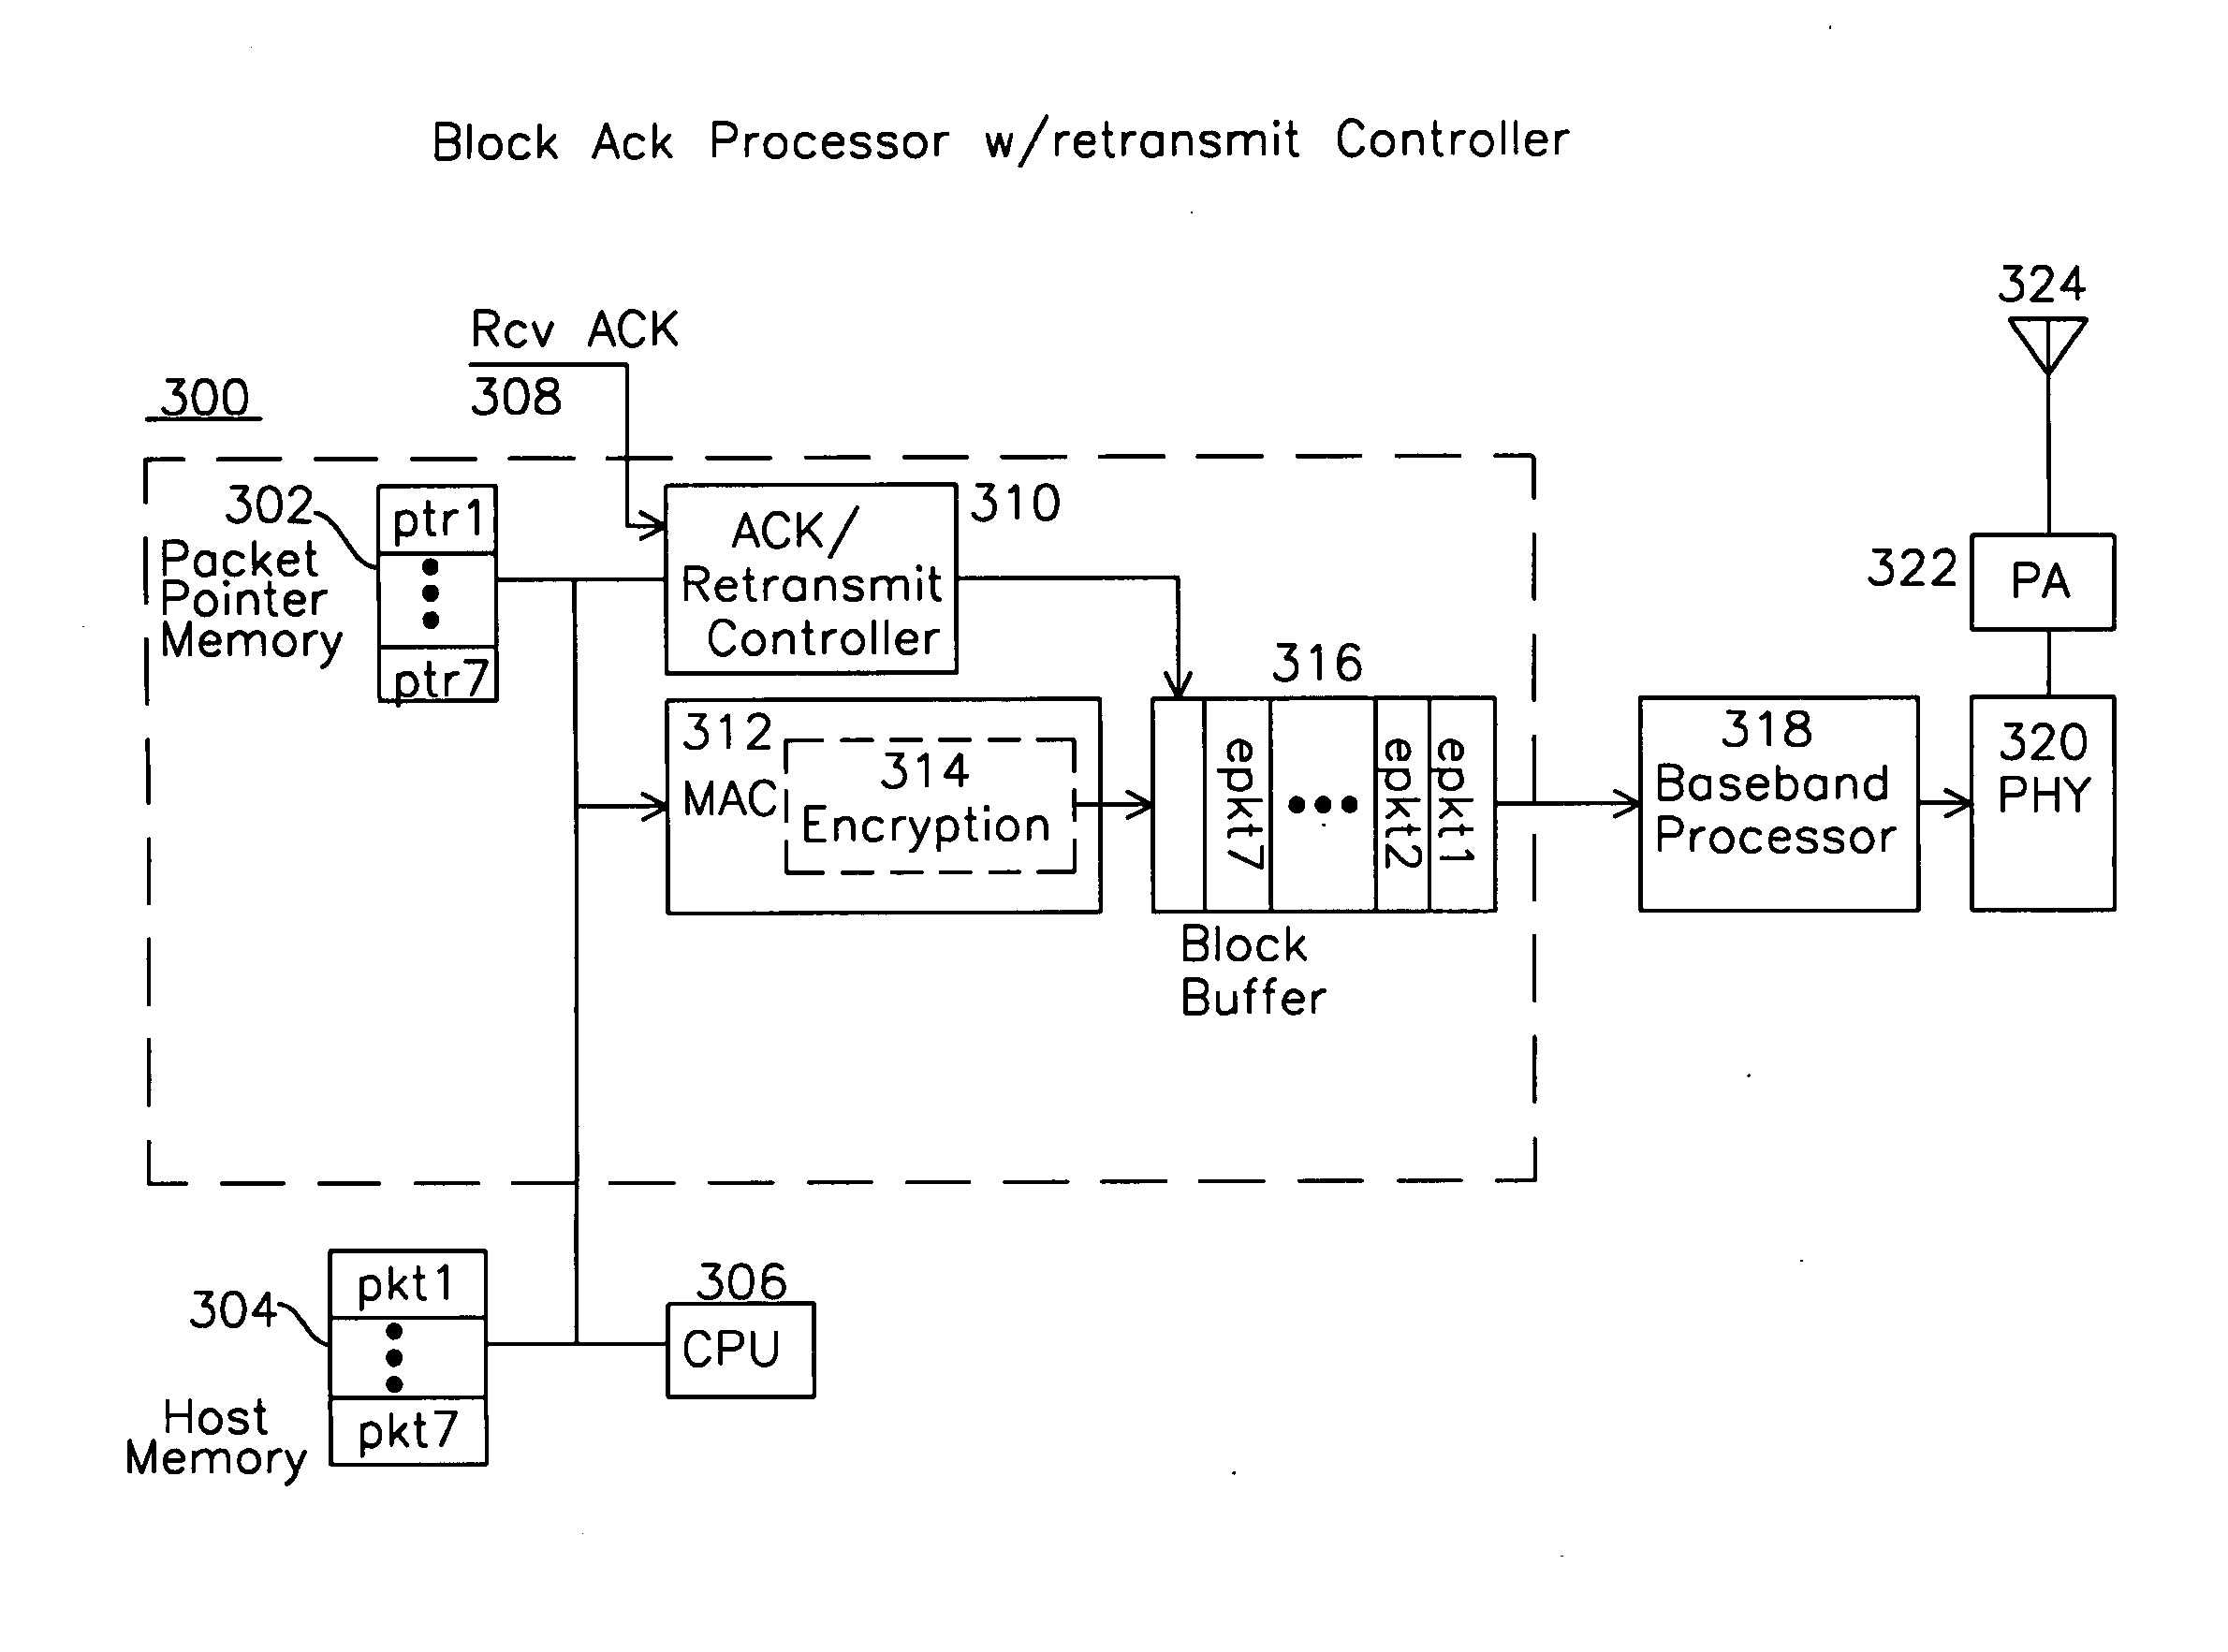 Packet Re-transmission Controller for Block Acknowledgement in a Communications System